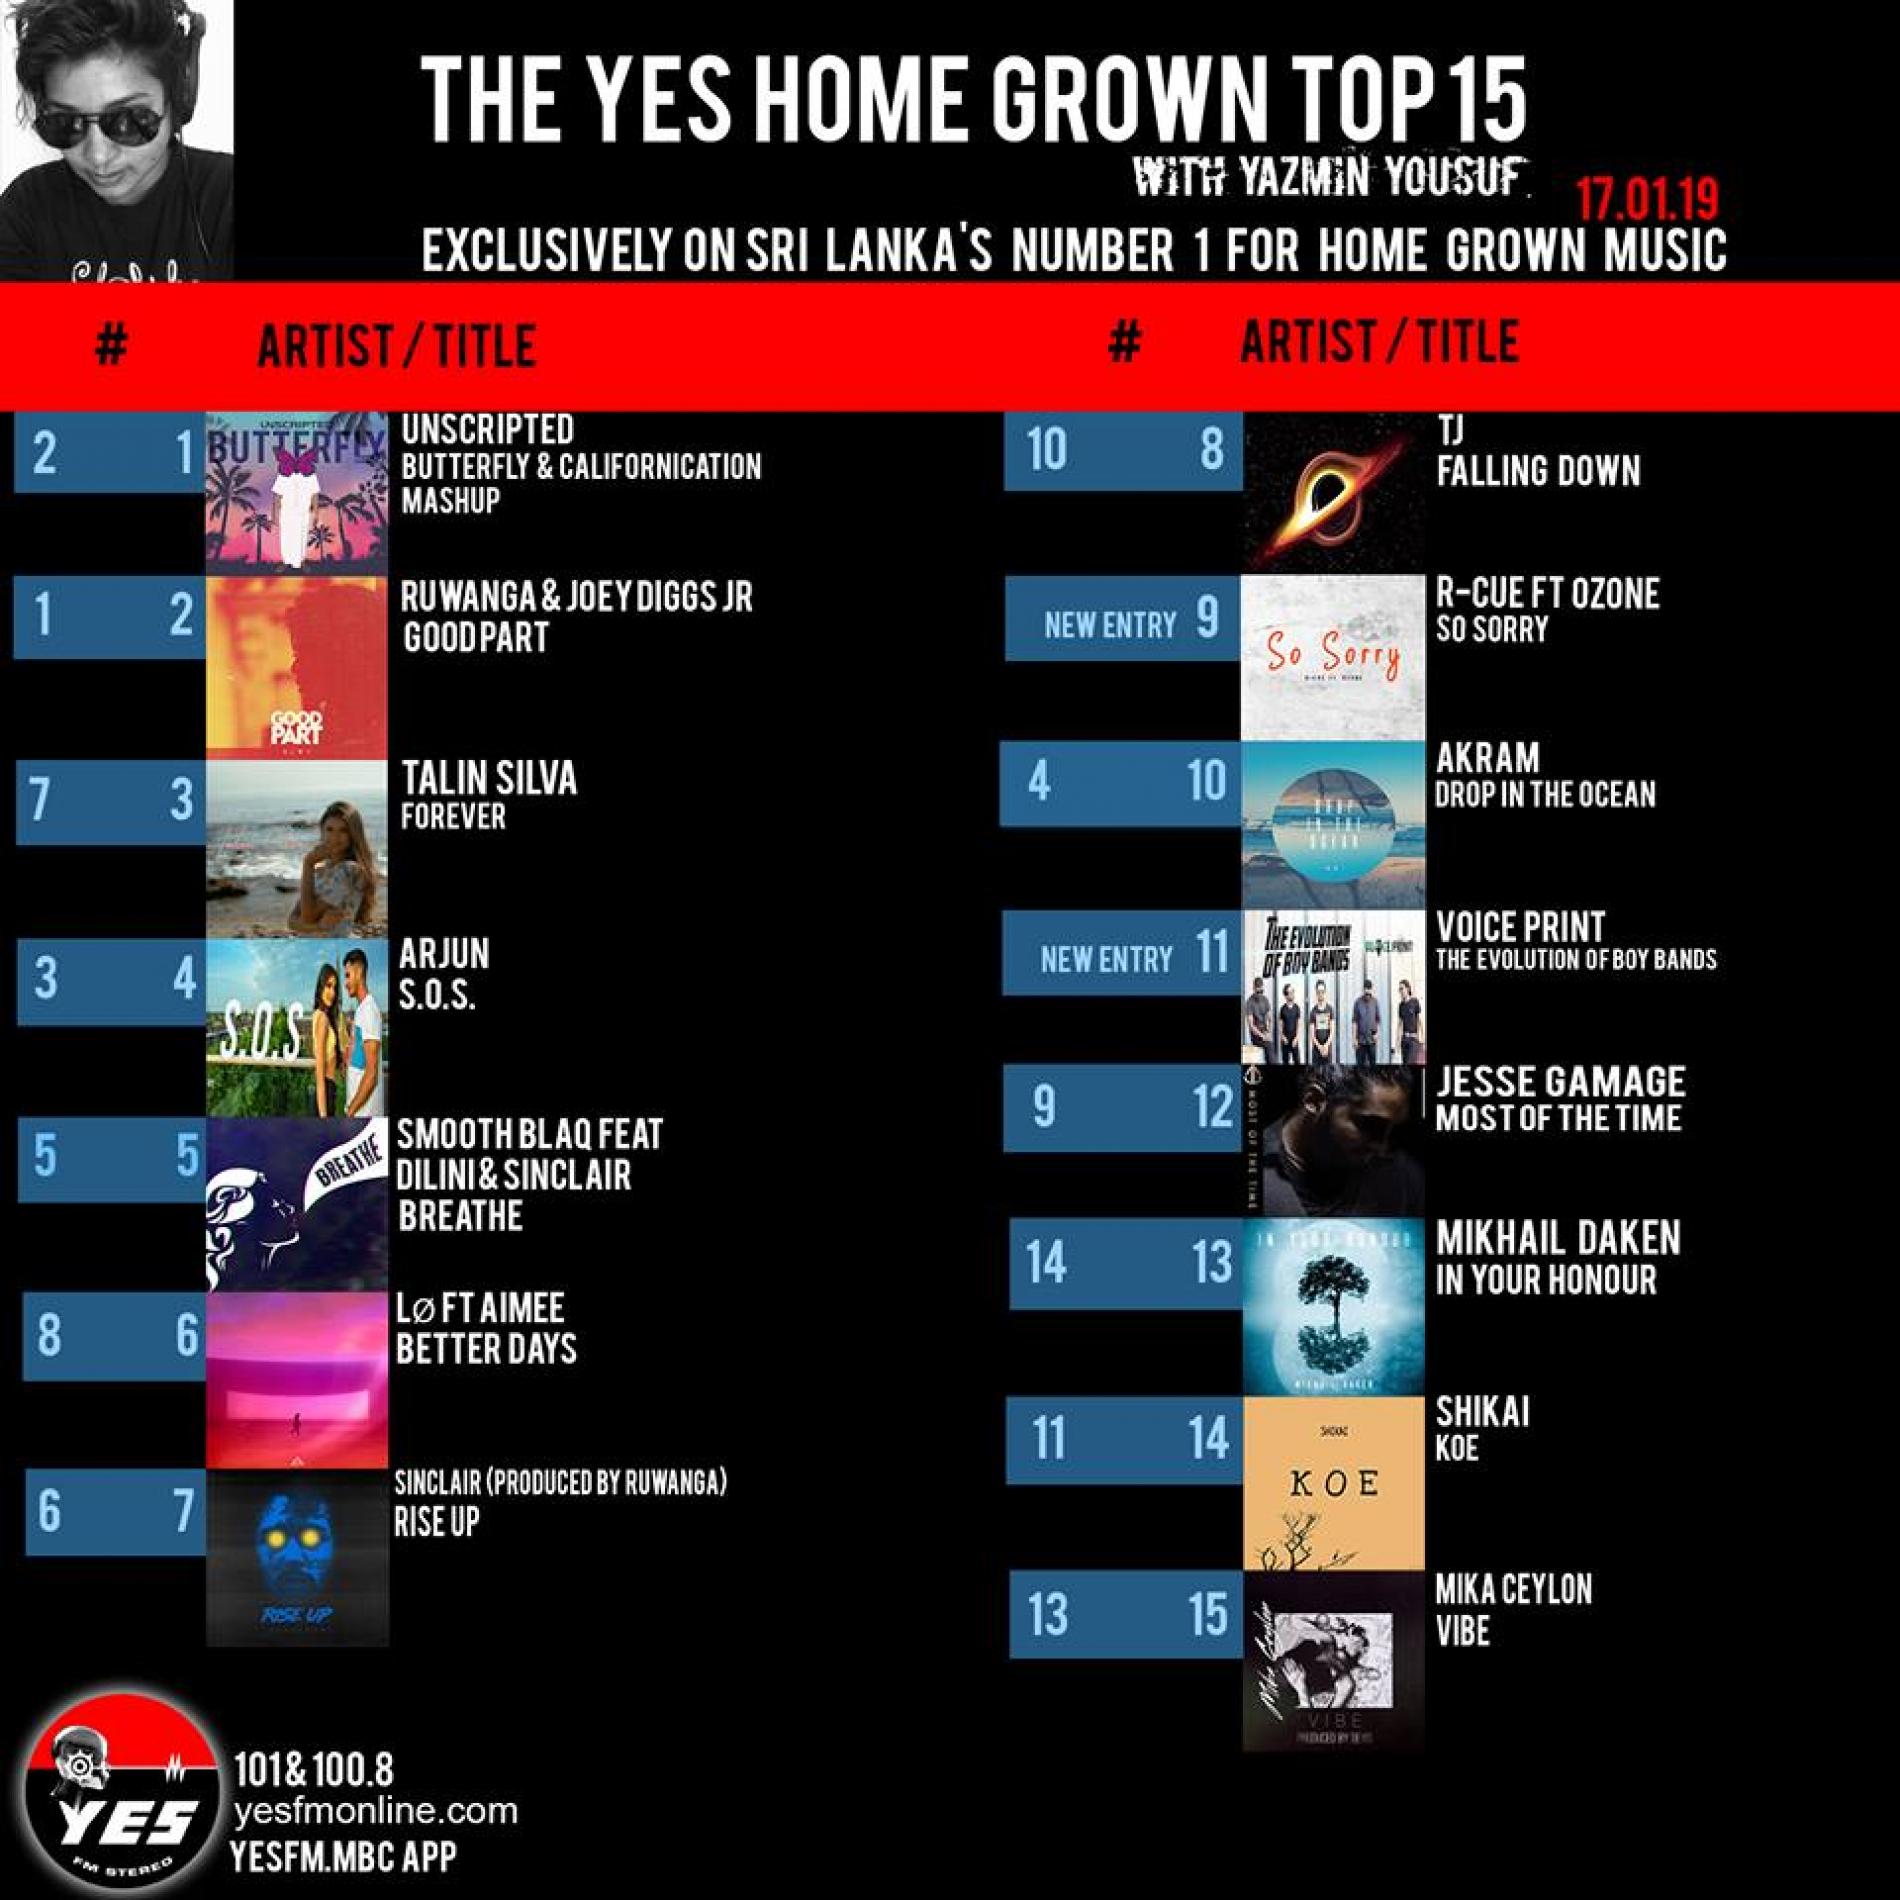 Unscripted Hit #1 Again On The YES Home Grown Top 15